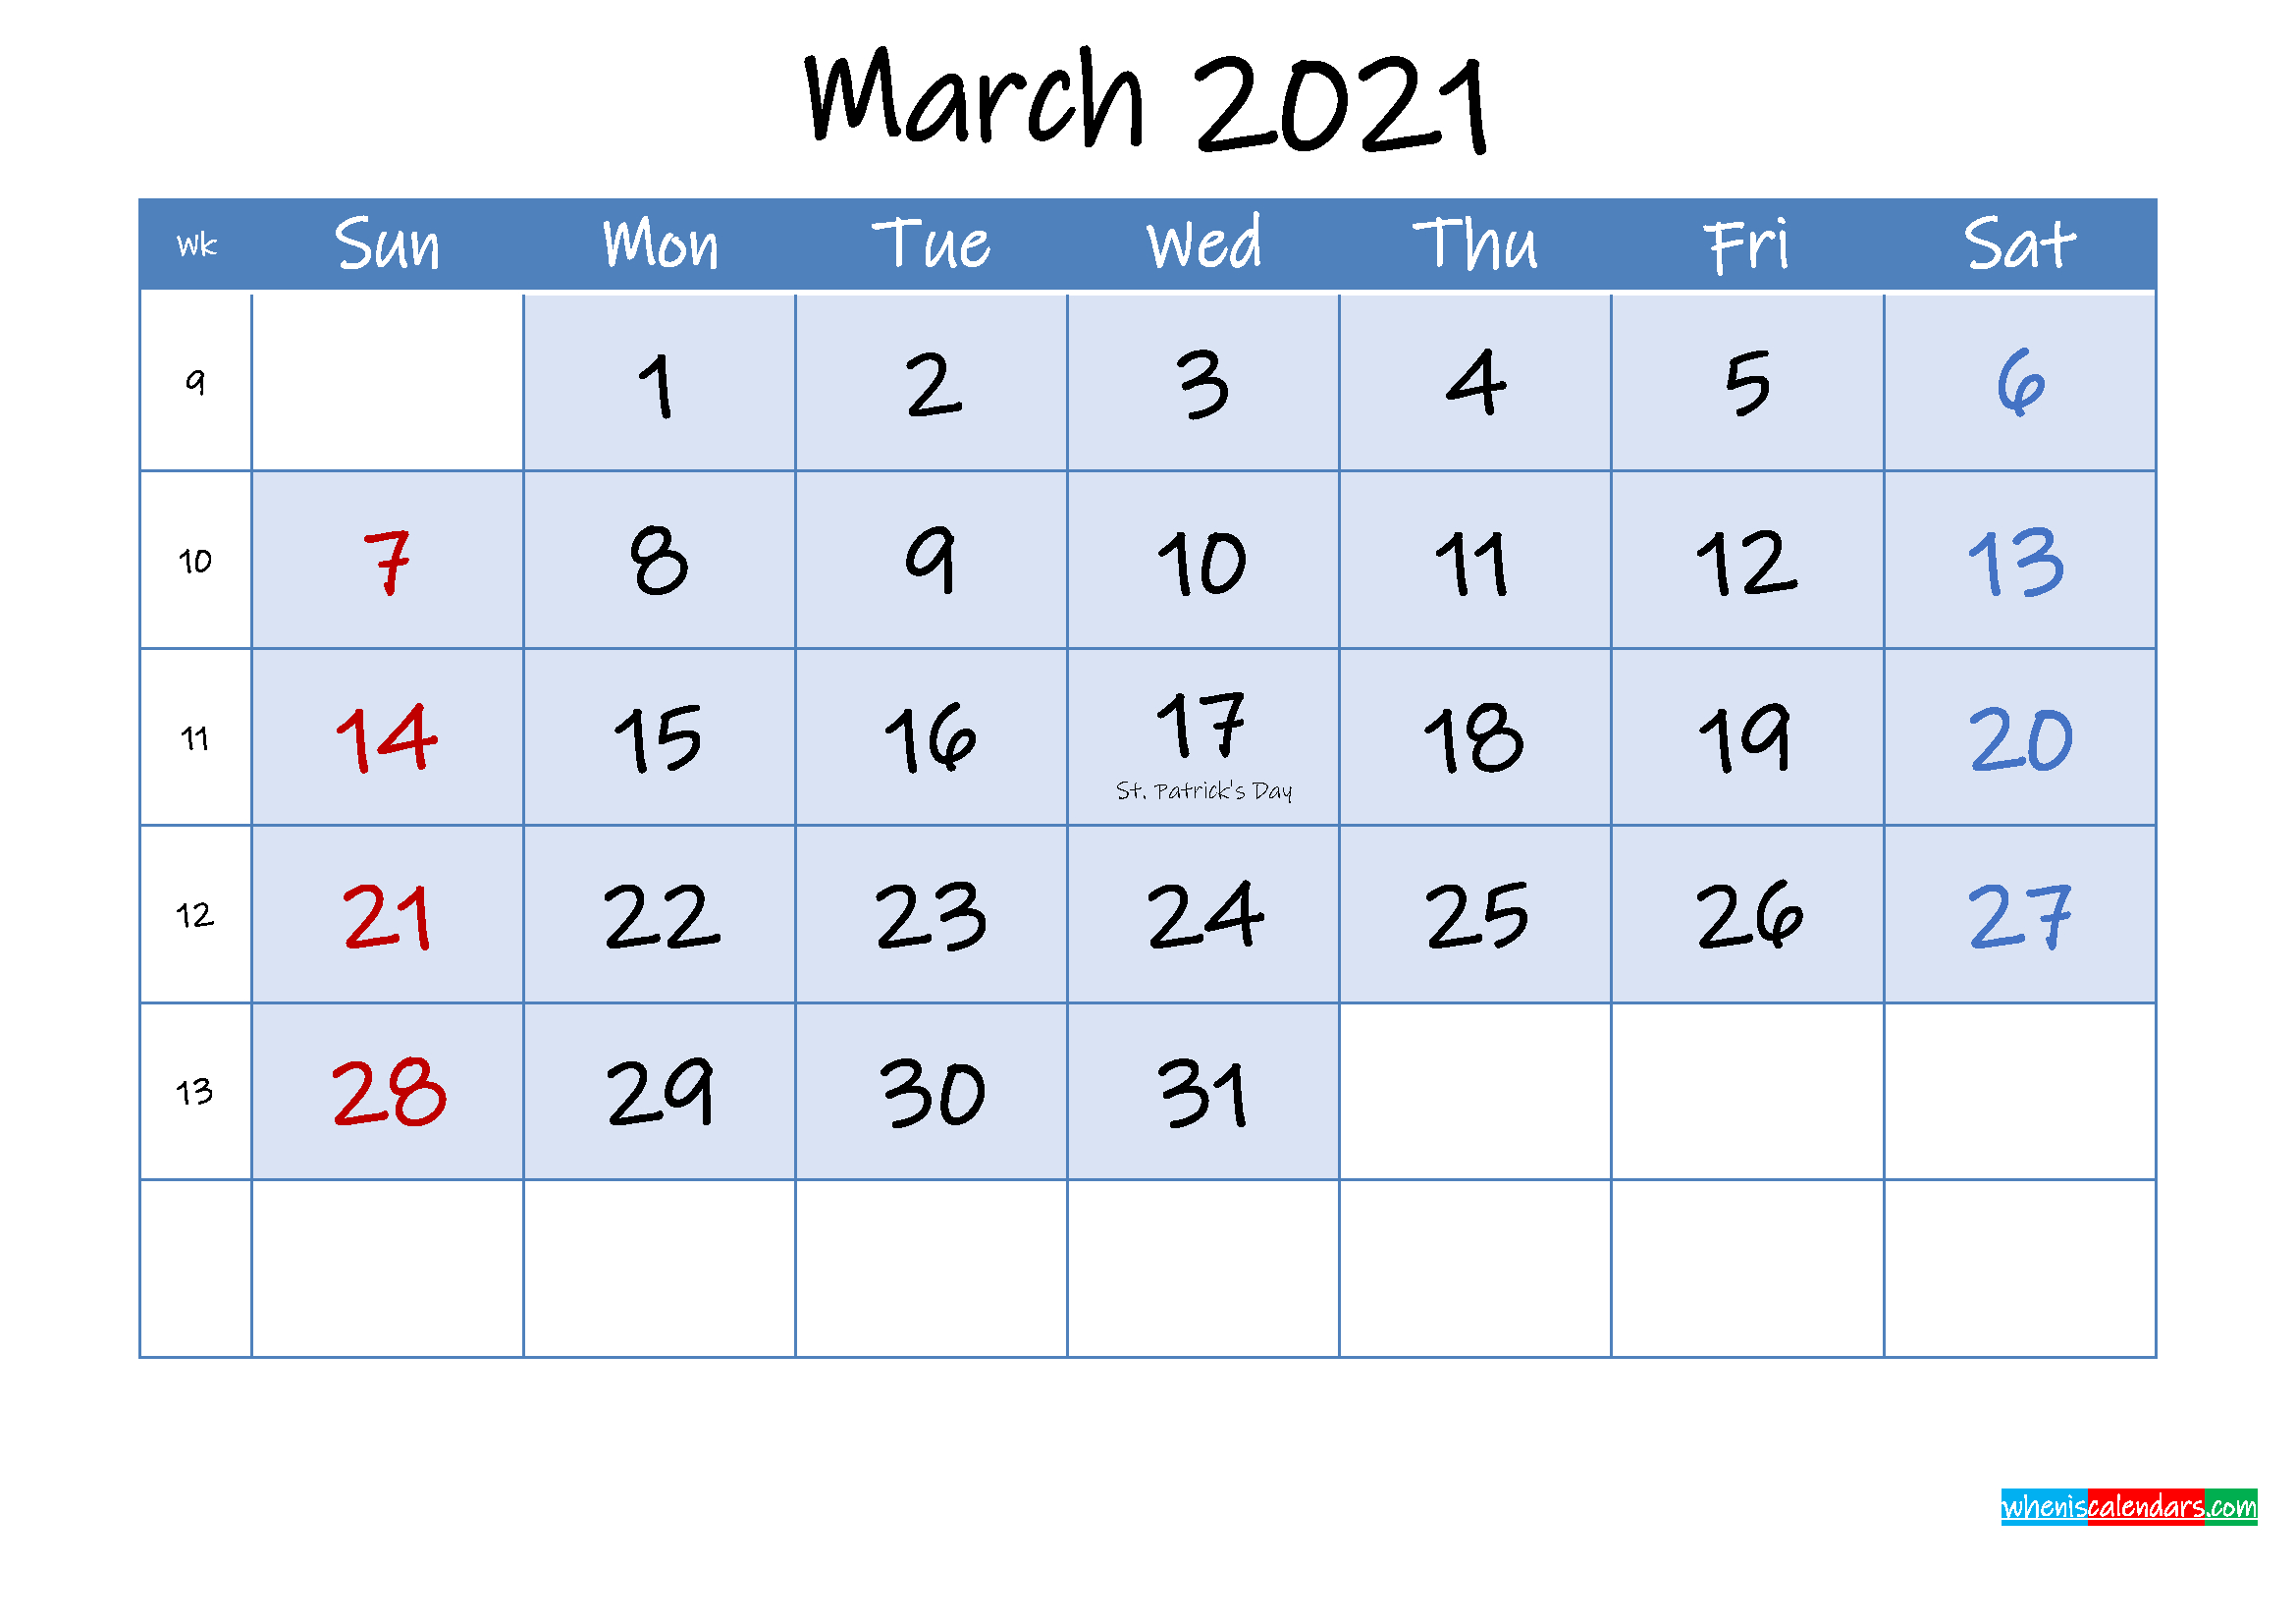 Free Printable March 2021 Calendar - Template Ink21M99 Calendar From November 2020 To March 2021